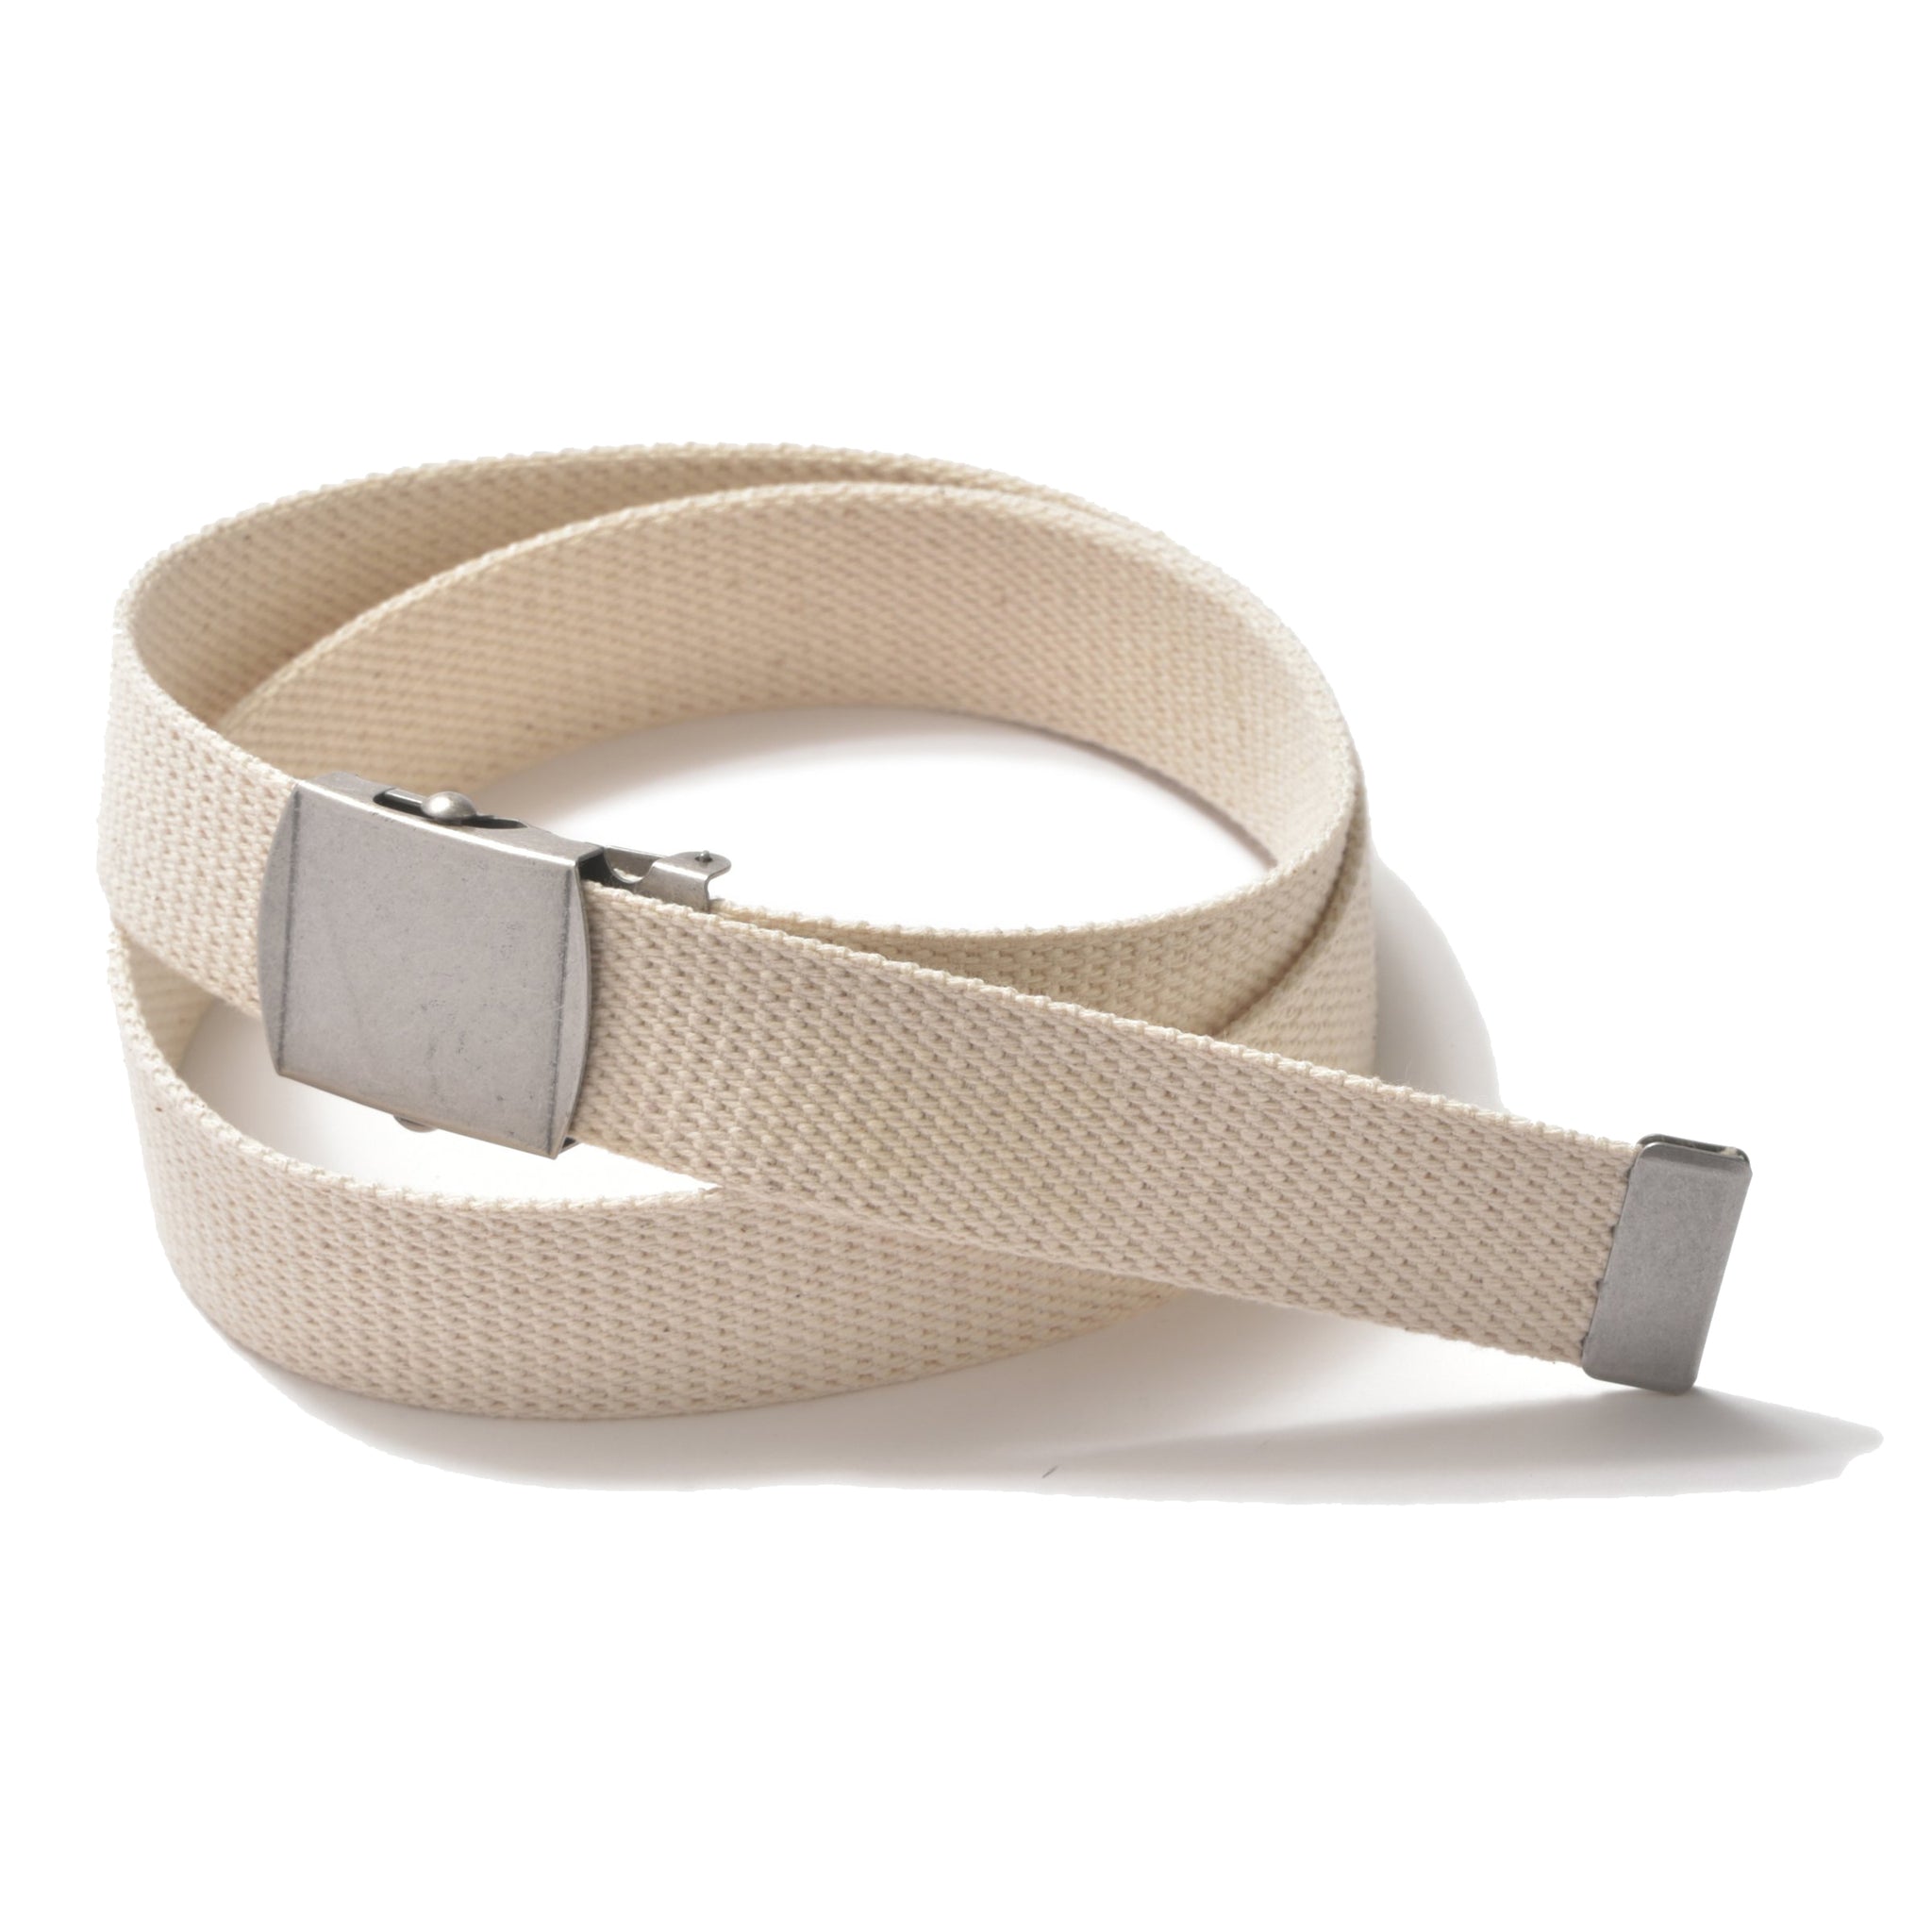 BOSS - Nappa-leather belt with branded buckle